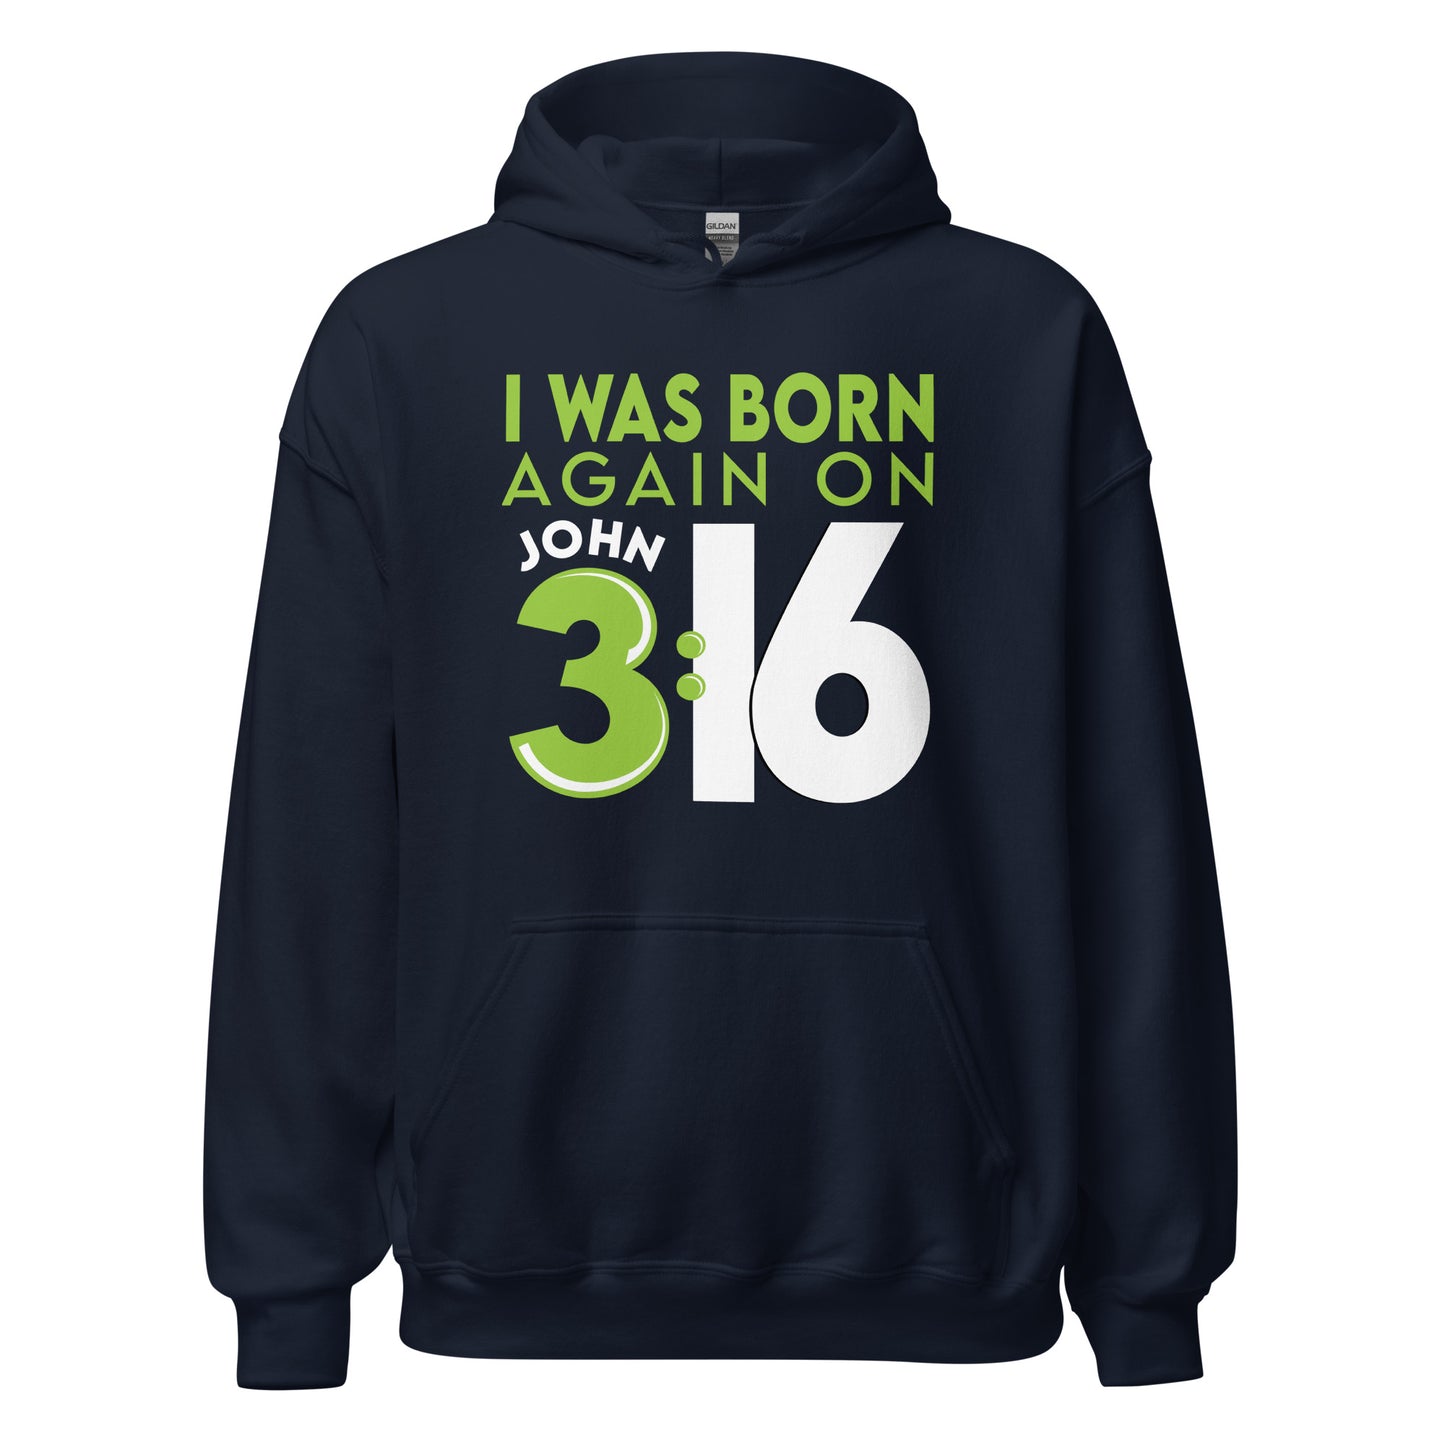 Navy Blue Unisex Cozy Hoodie with Christian aesthetic bible verse message that says, "I Was Born Again On John 3:16" bible verse quote in lime green and white for men and women